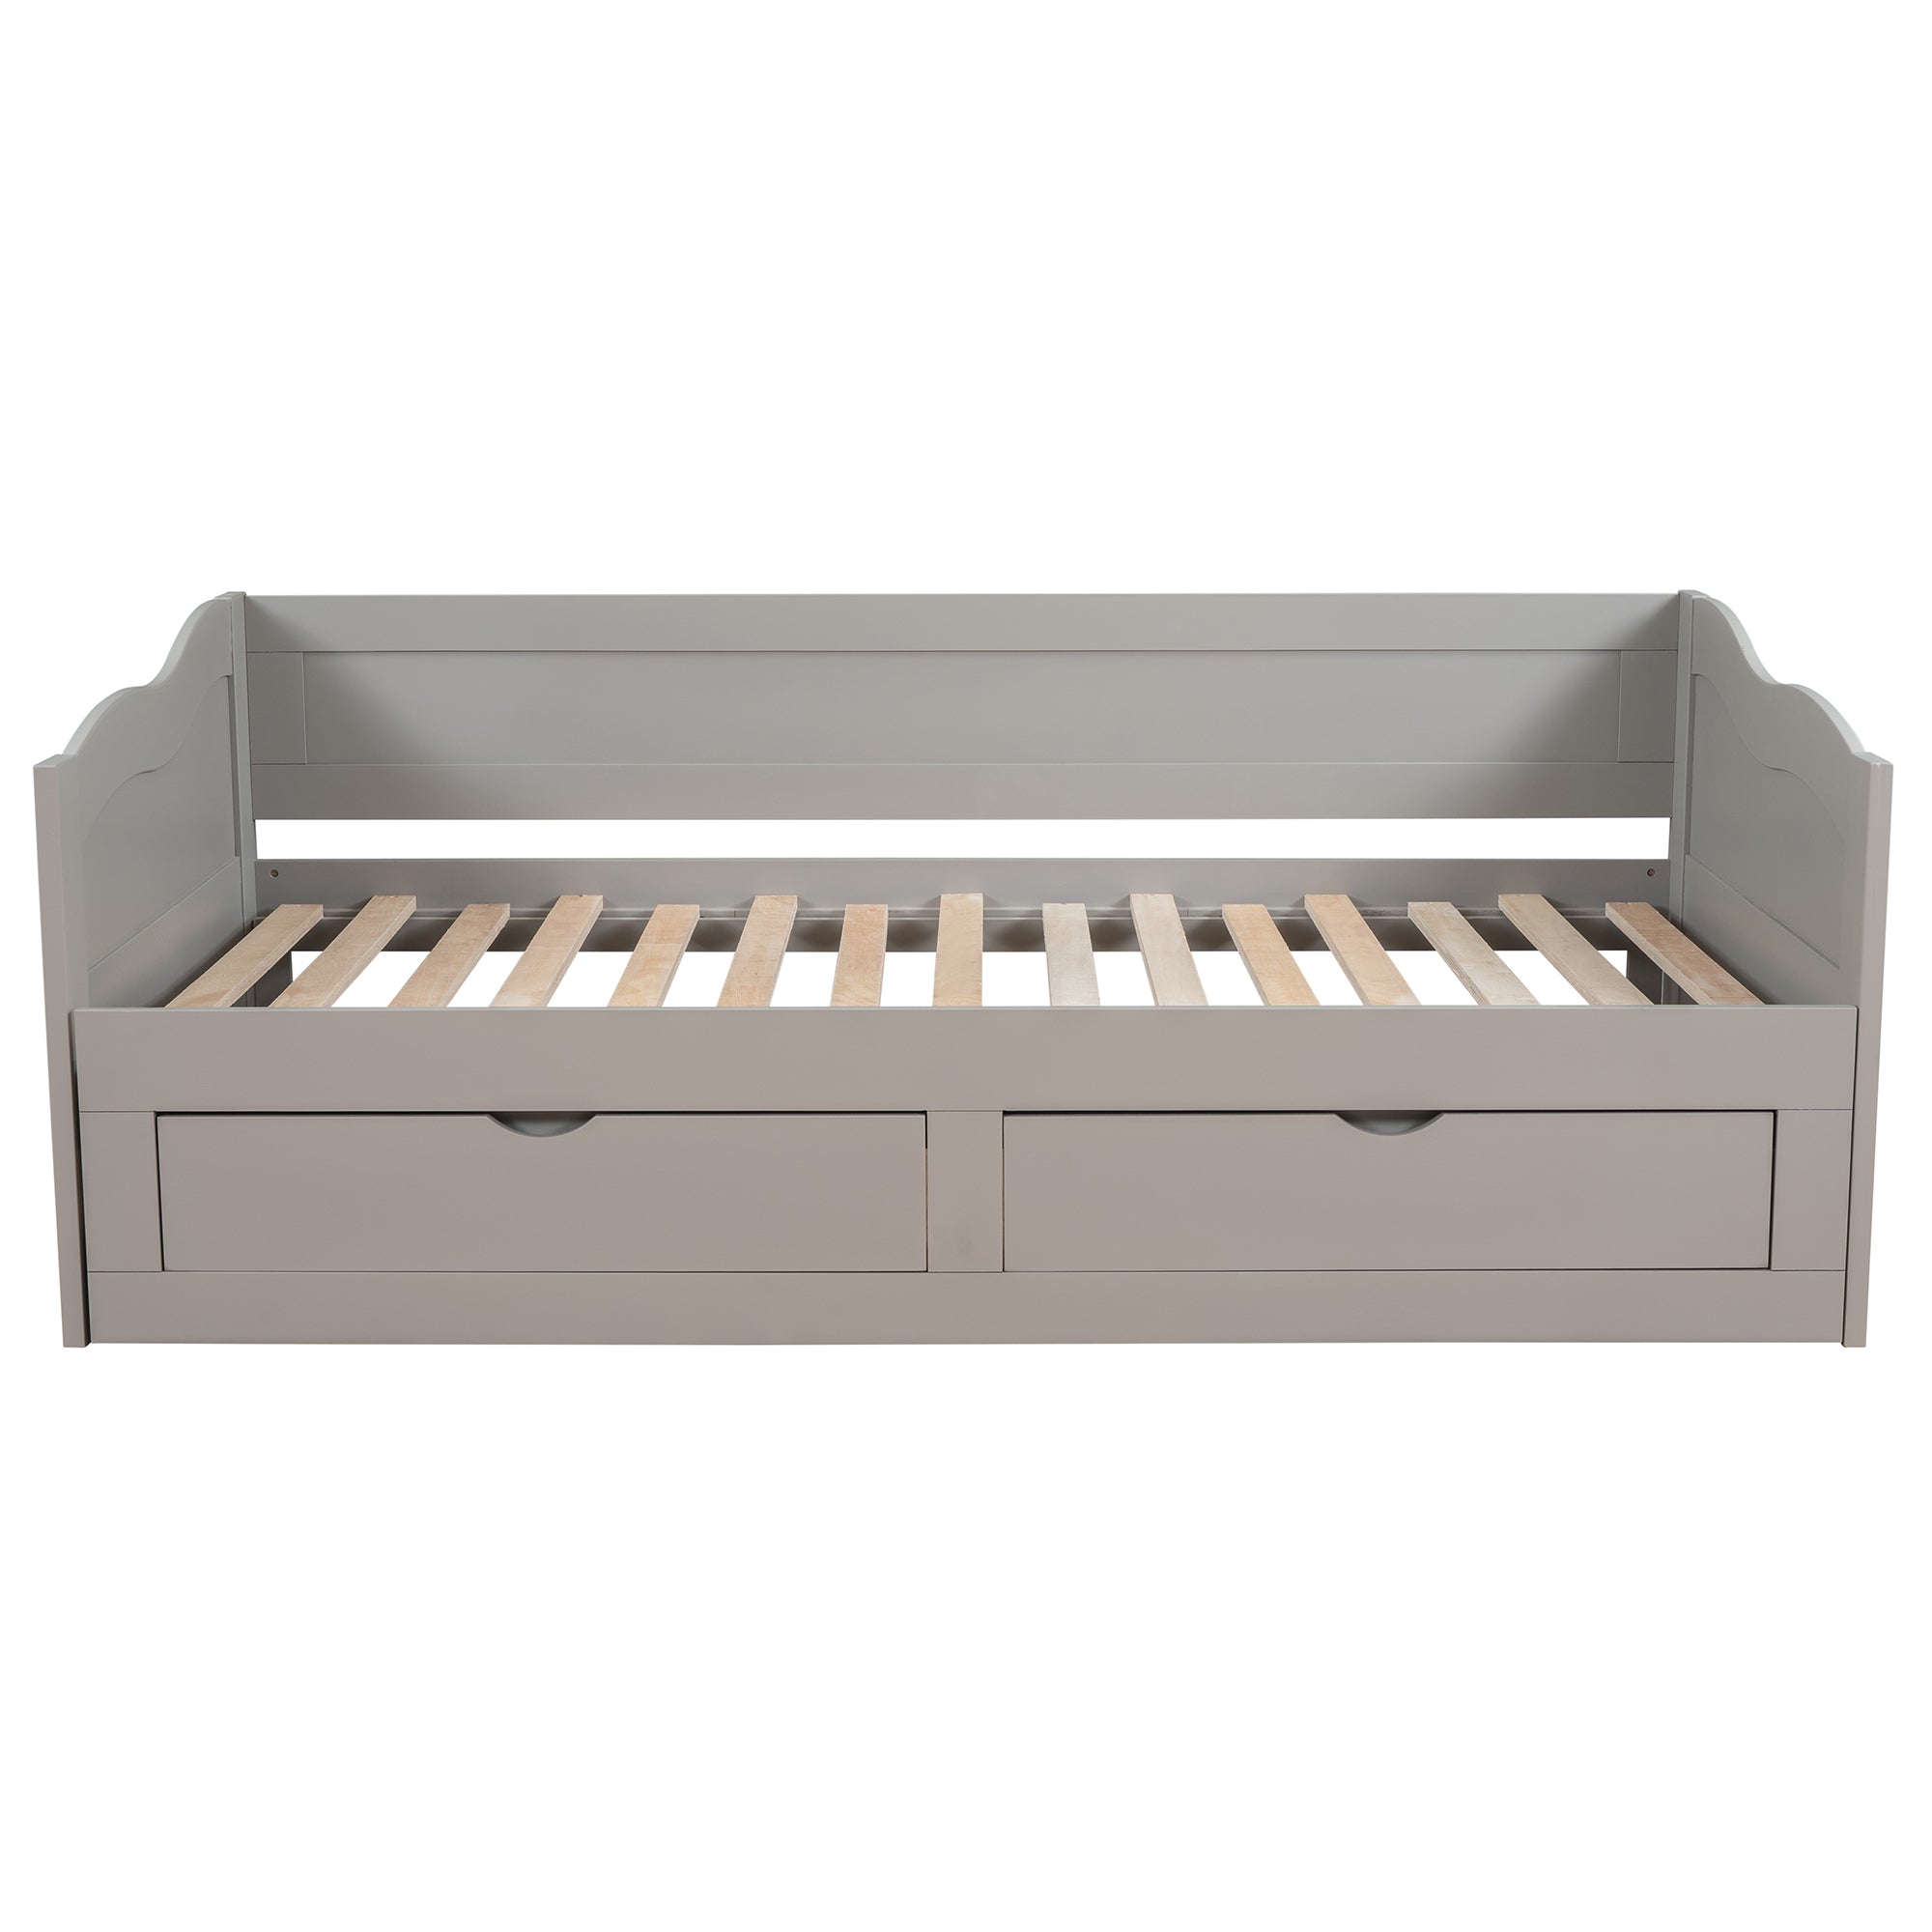 Wooden Daybed with Trundle Bed and Two Storage Drawers (Gray)